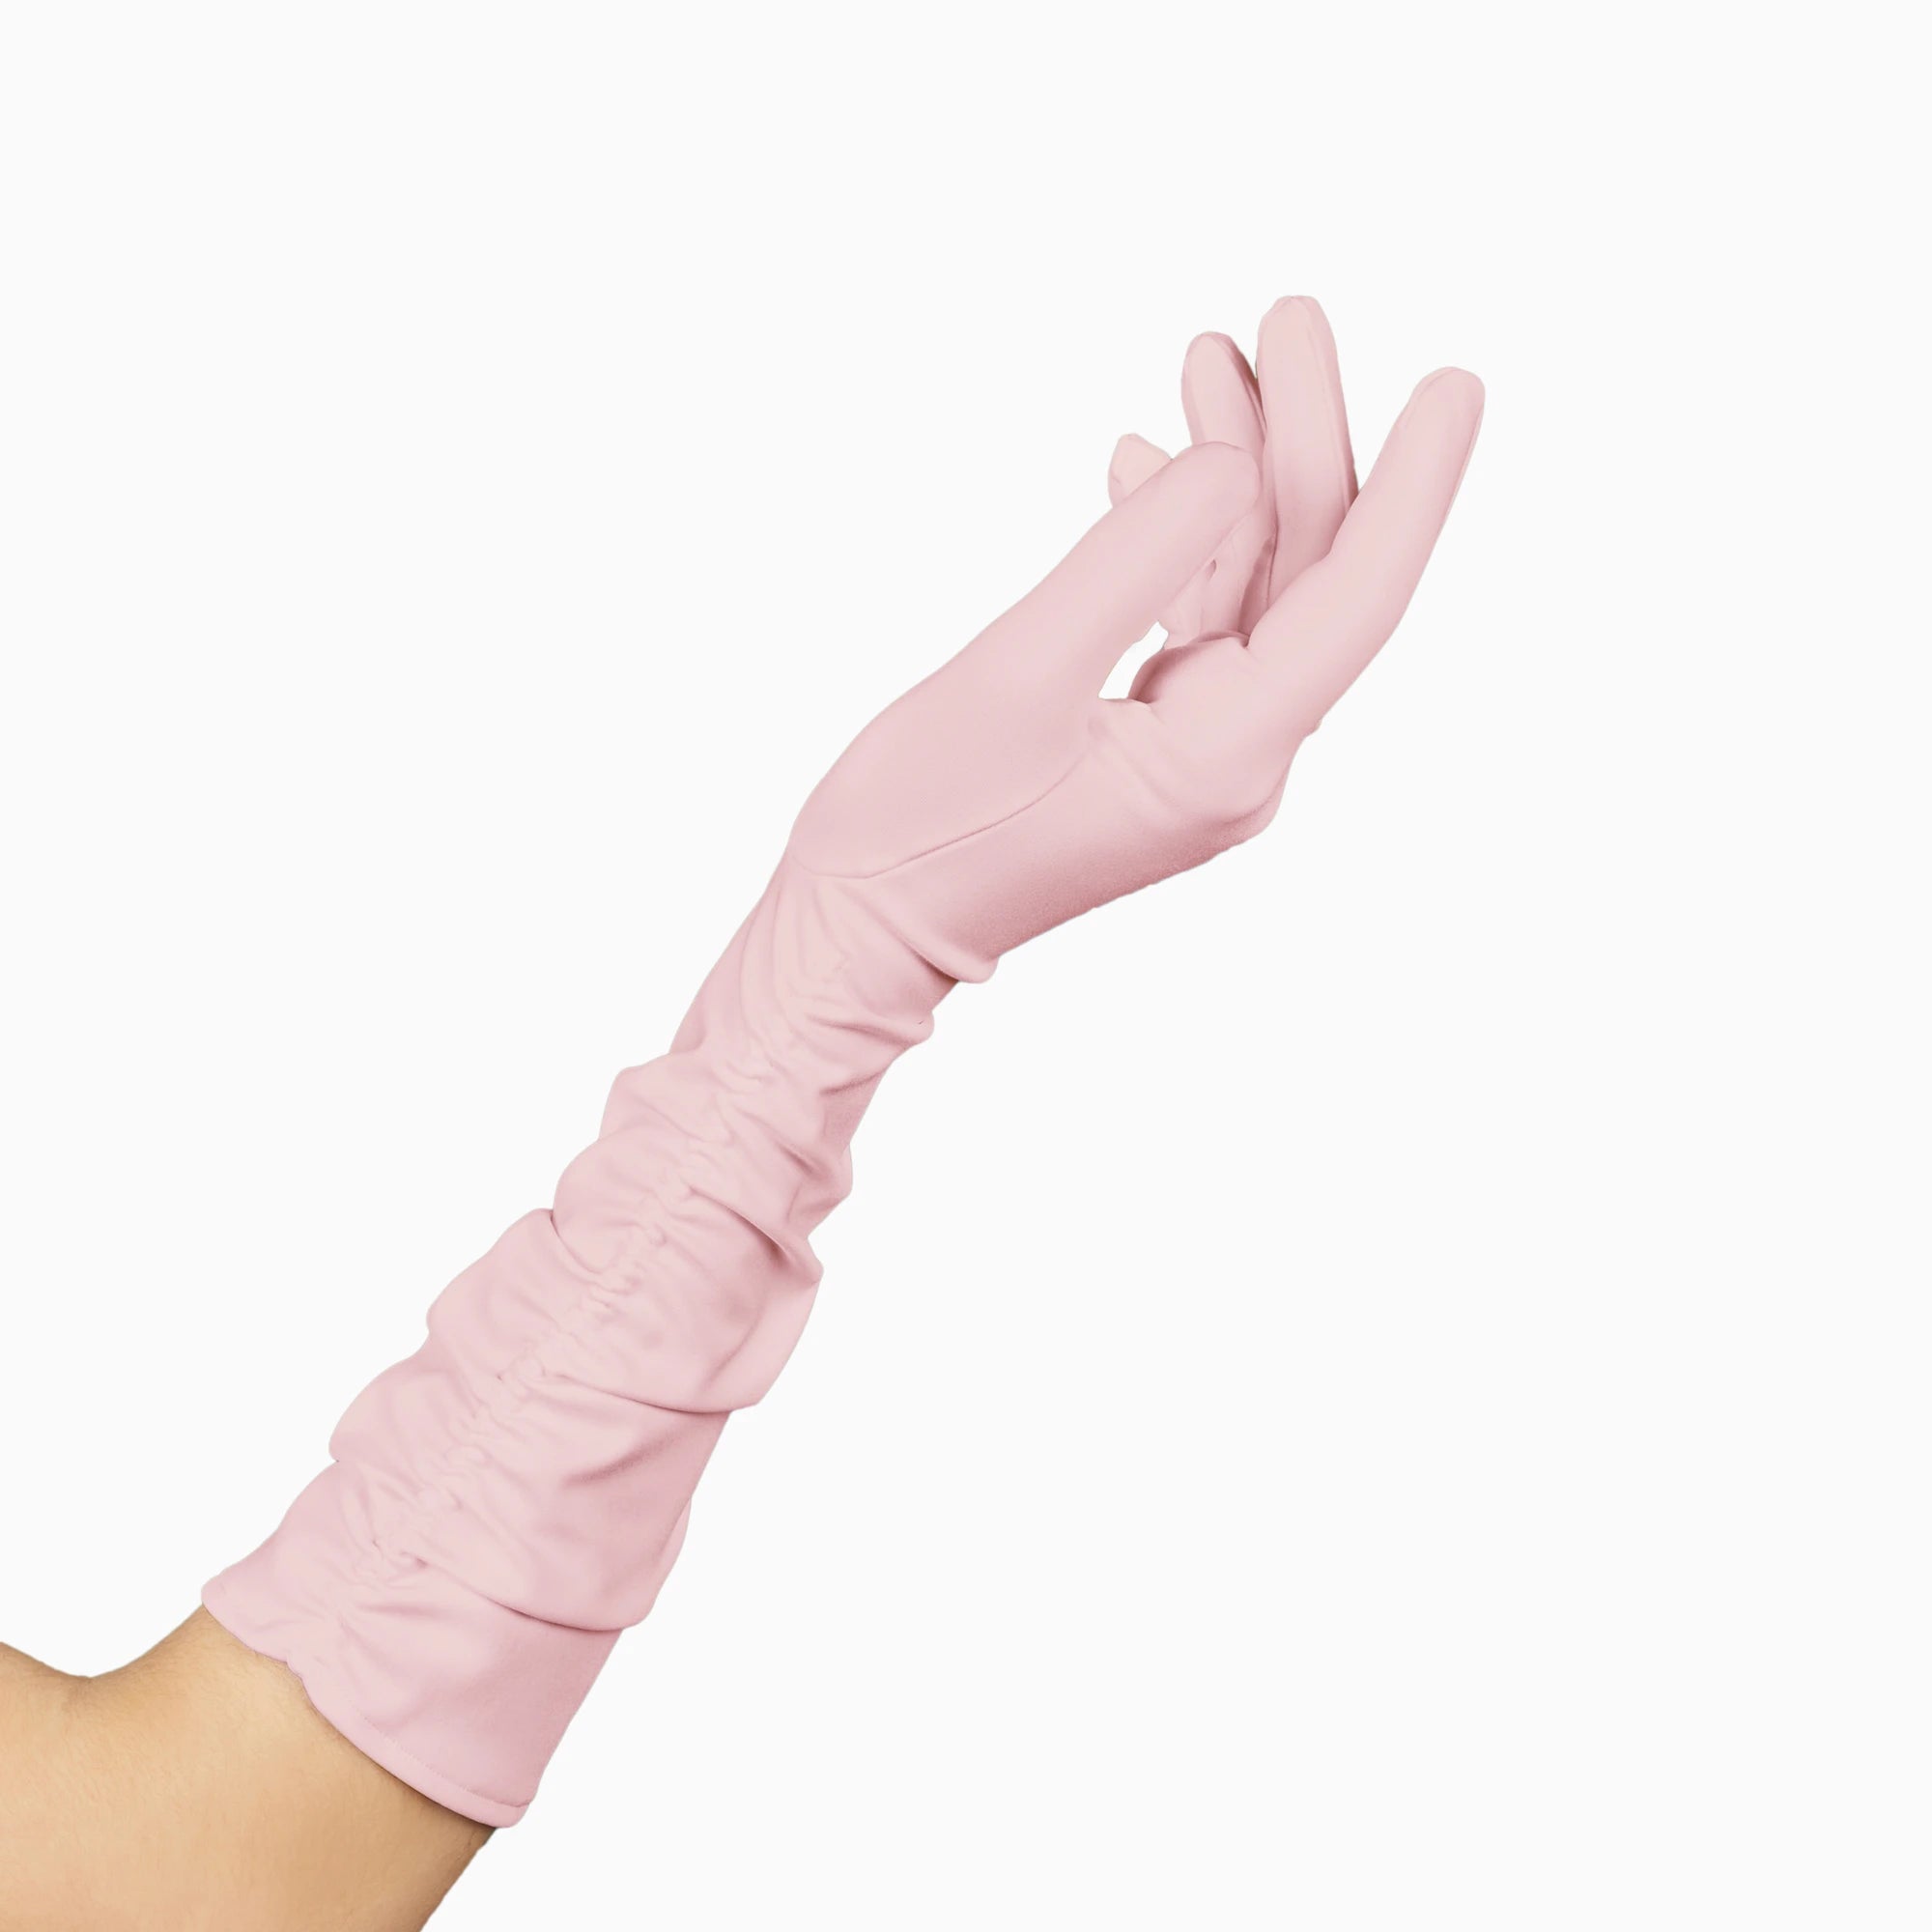 THE STEPHANIE women's elbow, long, pink gloves.